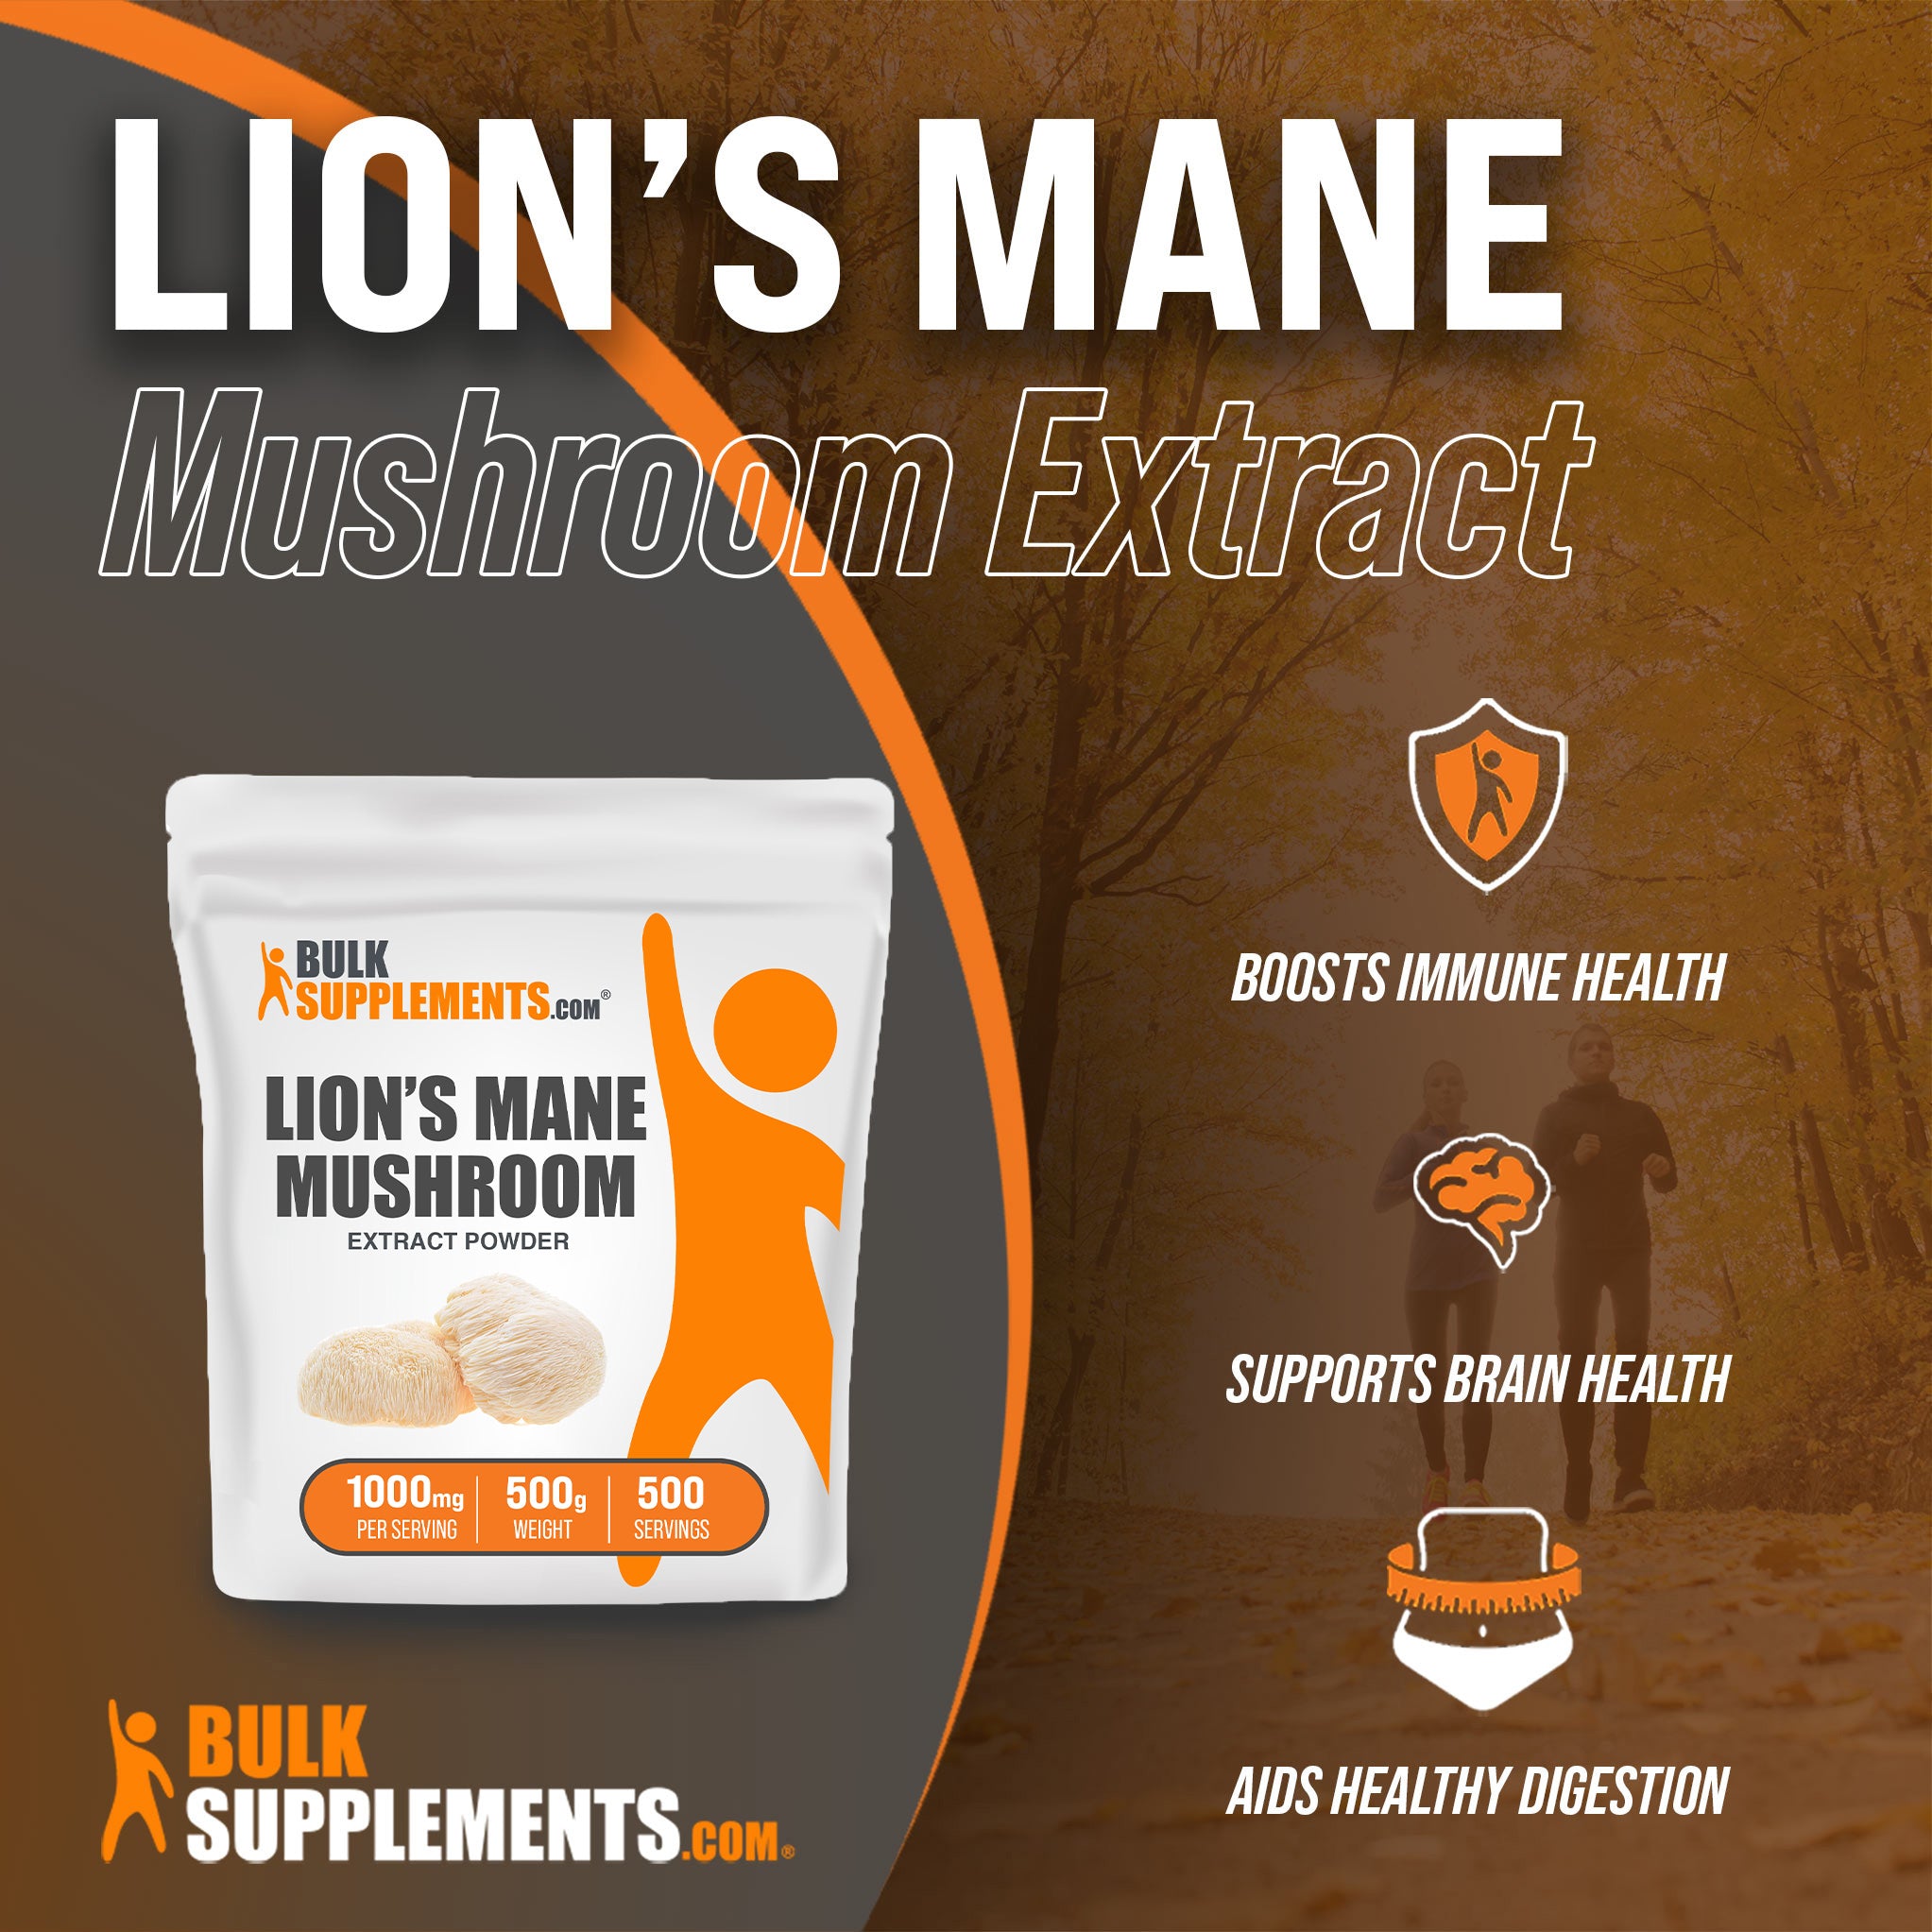 Benefits of Lion's Mane Mushroom Extract: boosts immune health, supports brain health, aids healthy digestion